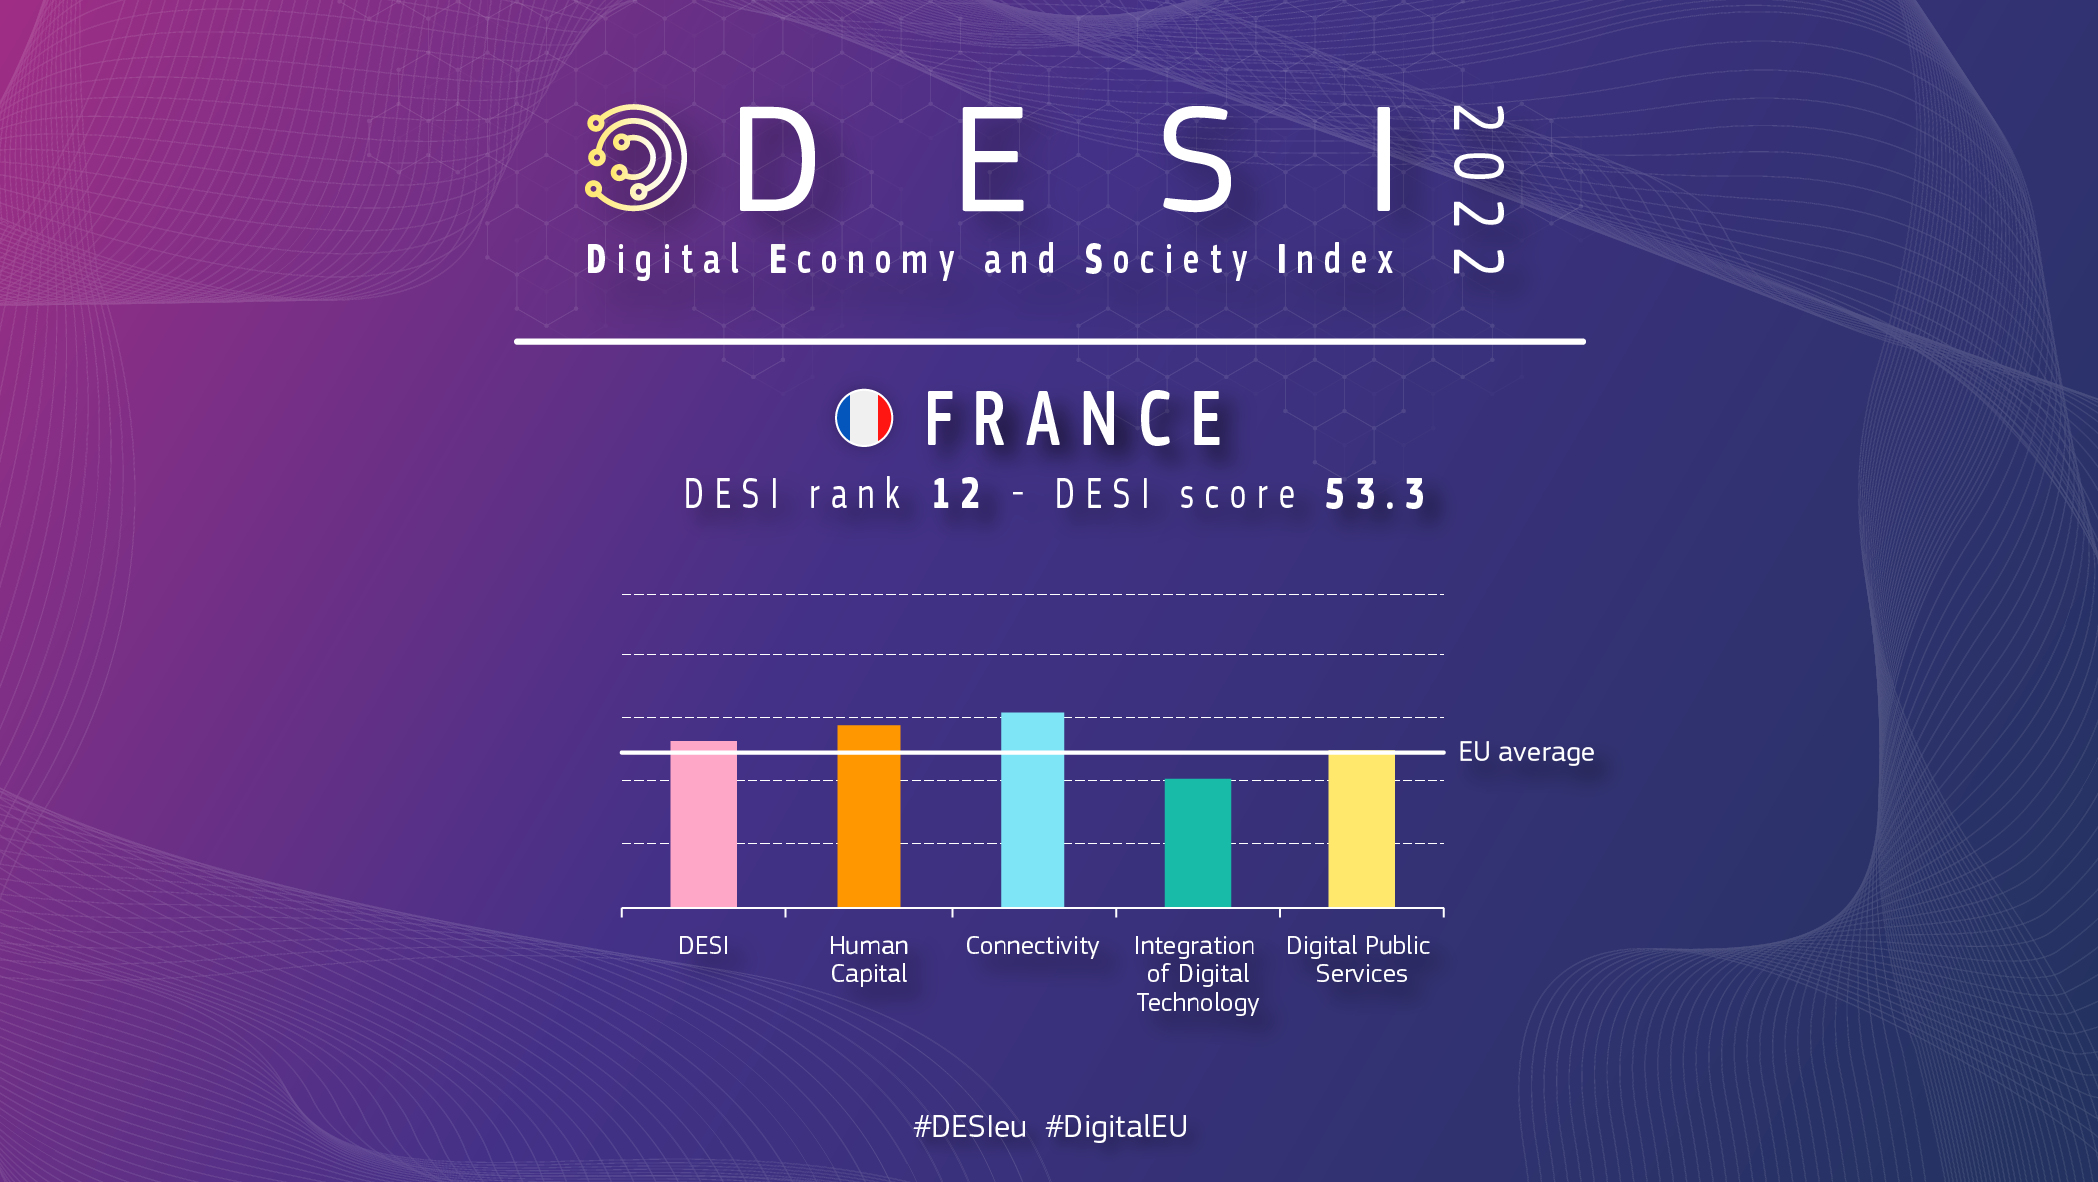 Graphic overview of France in DESI showing a ranking of 12 and a score of 53.3